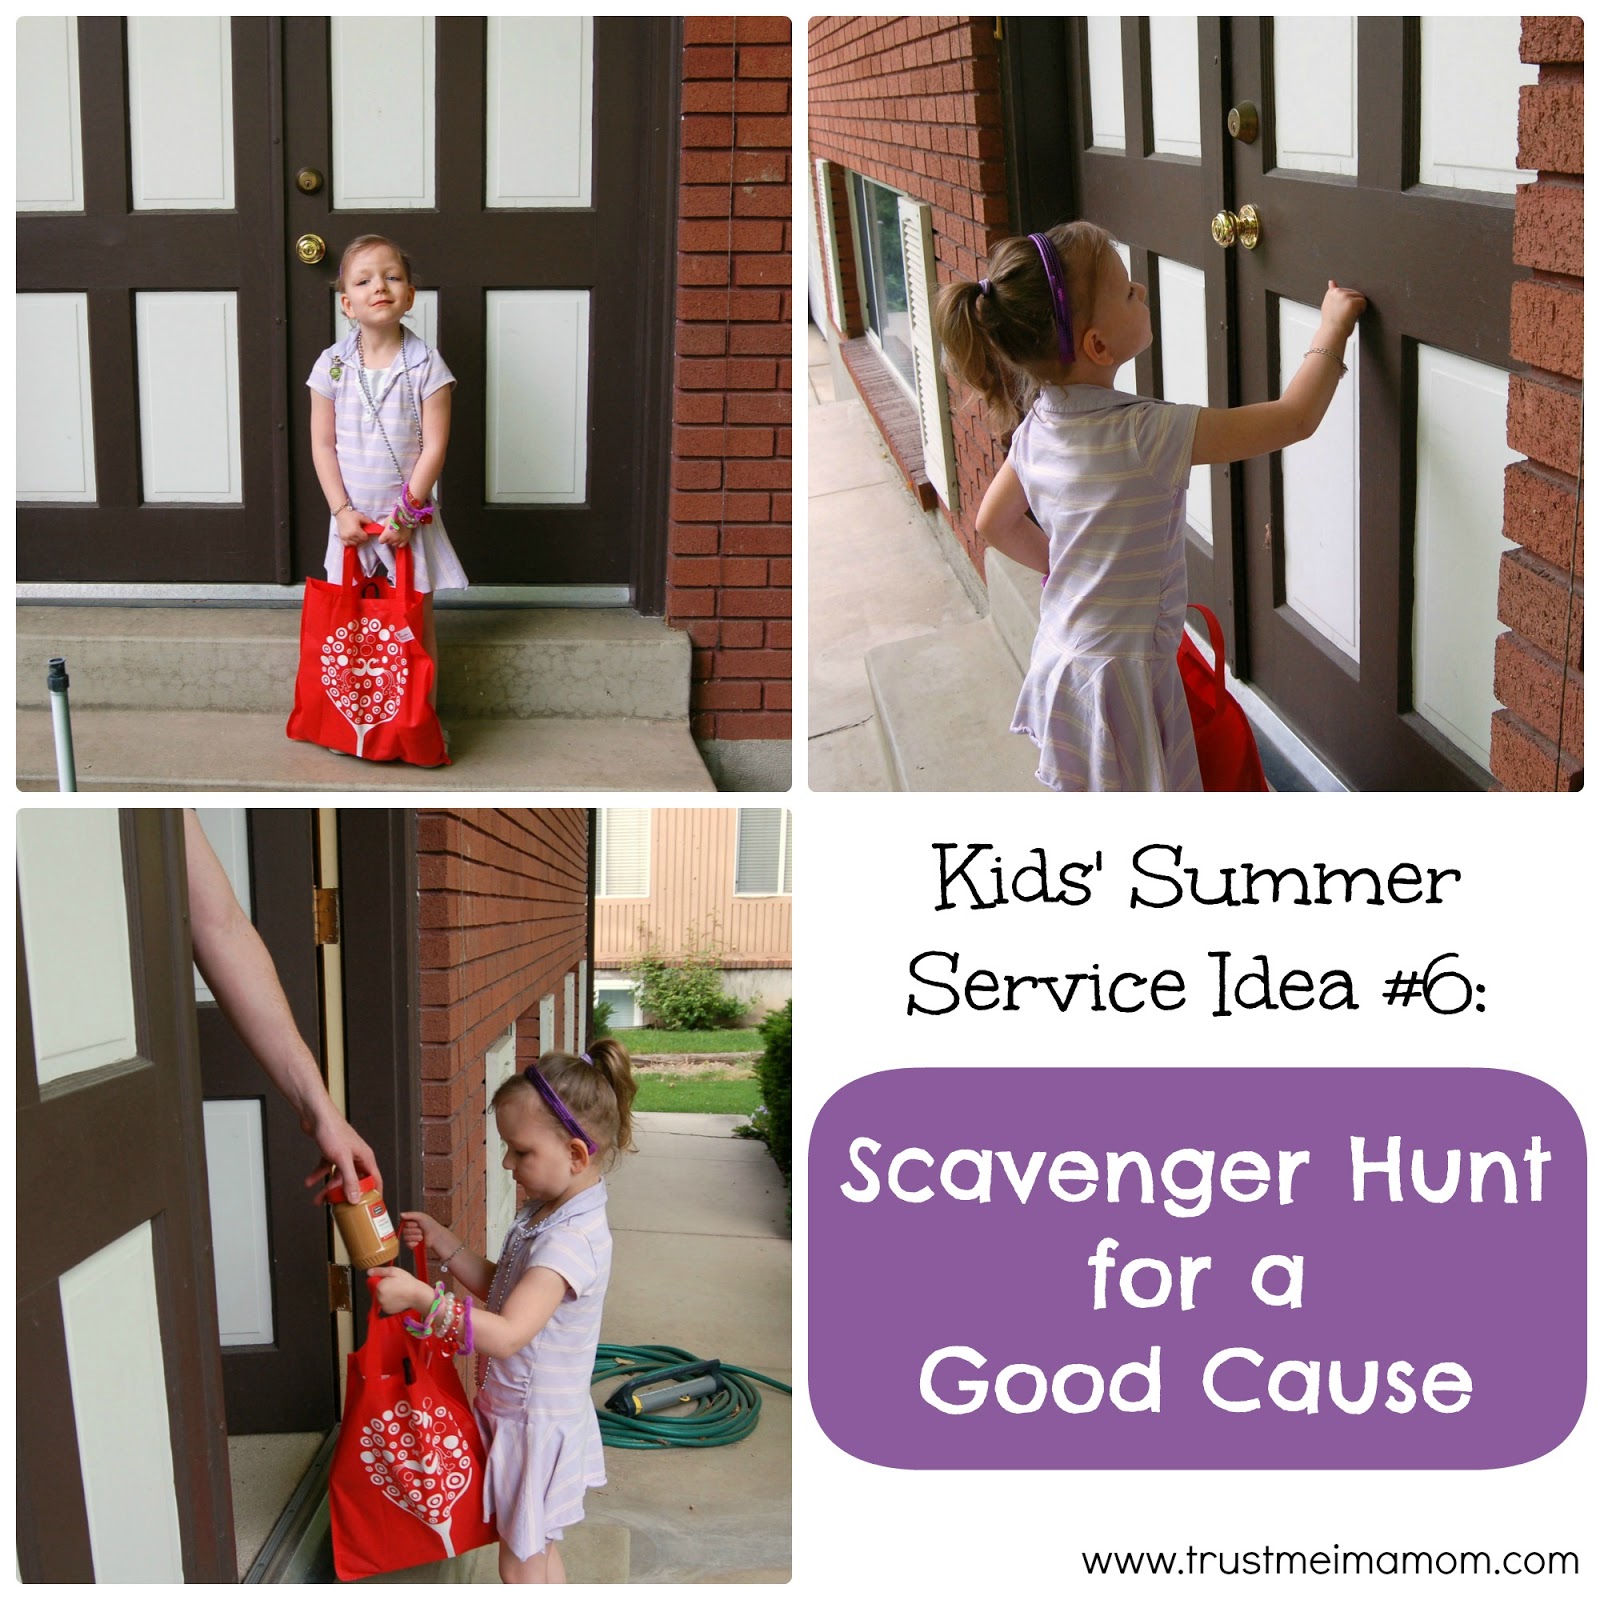 Fun Ways to Serve with Your Kids This Summer: Idea #6 - Have a scavenger hunt to find food to donate to your local food bank!